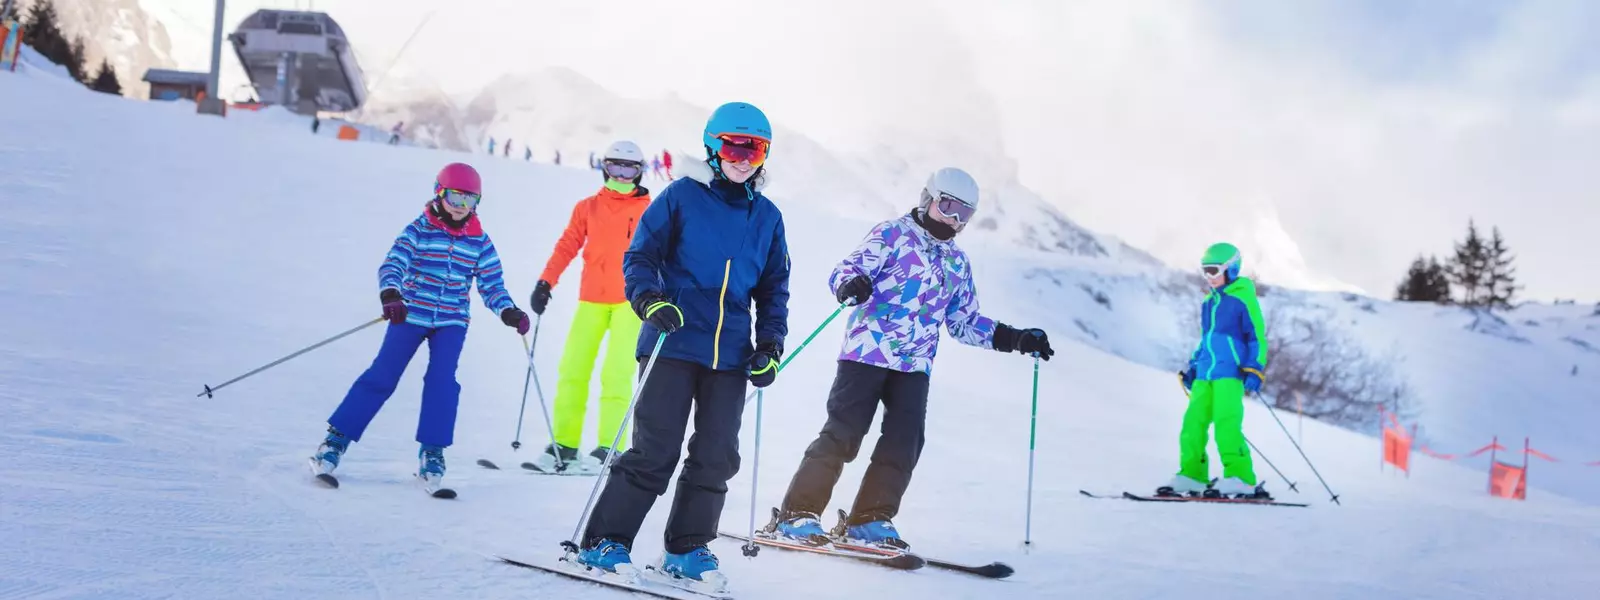 Group of children ski downhill together in colorful outfit on Alpine mountain slope